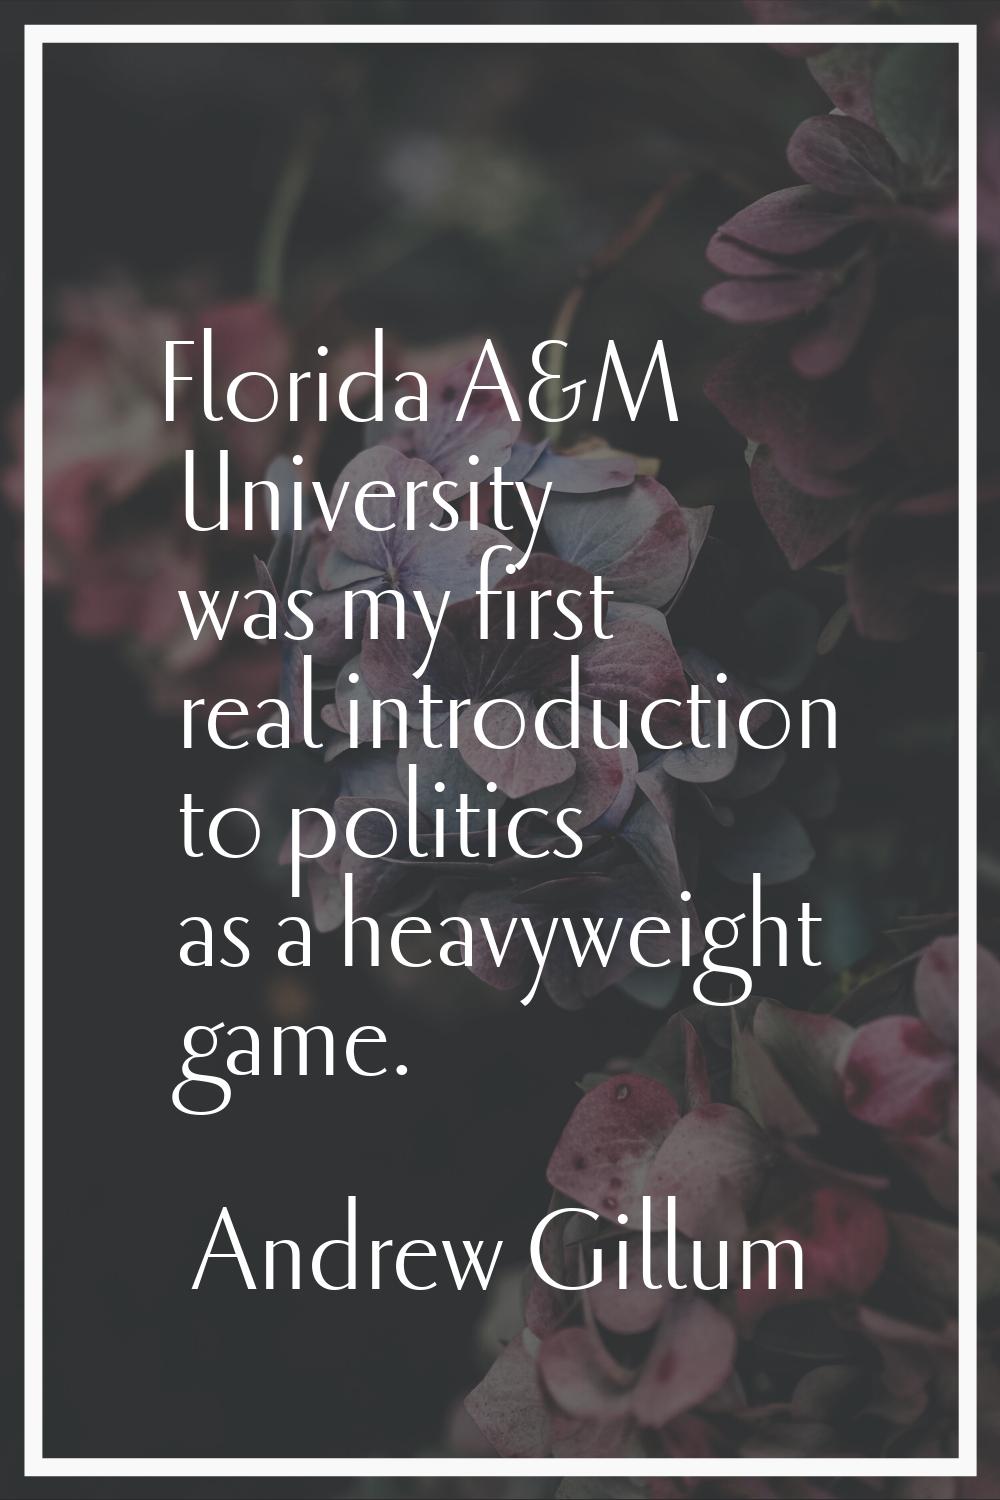 Florida A&M University was my first real introduction to politics as a heavyweight game.